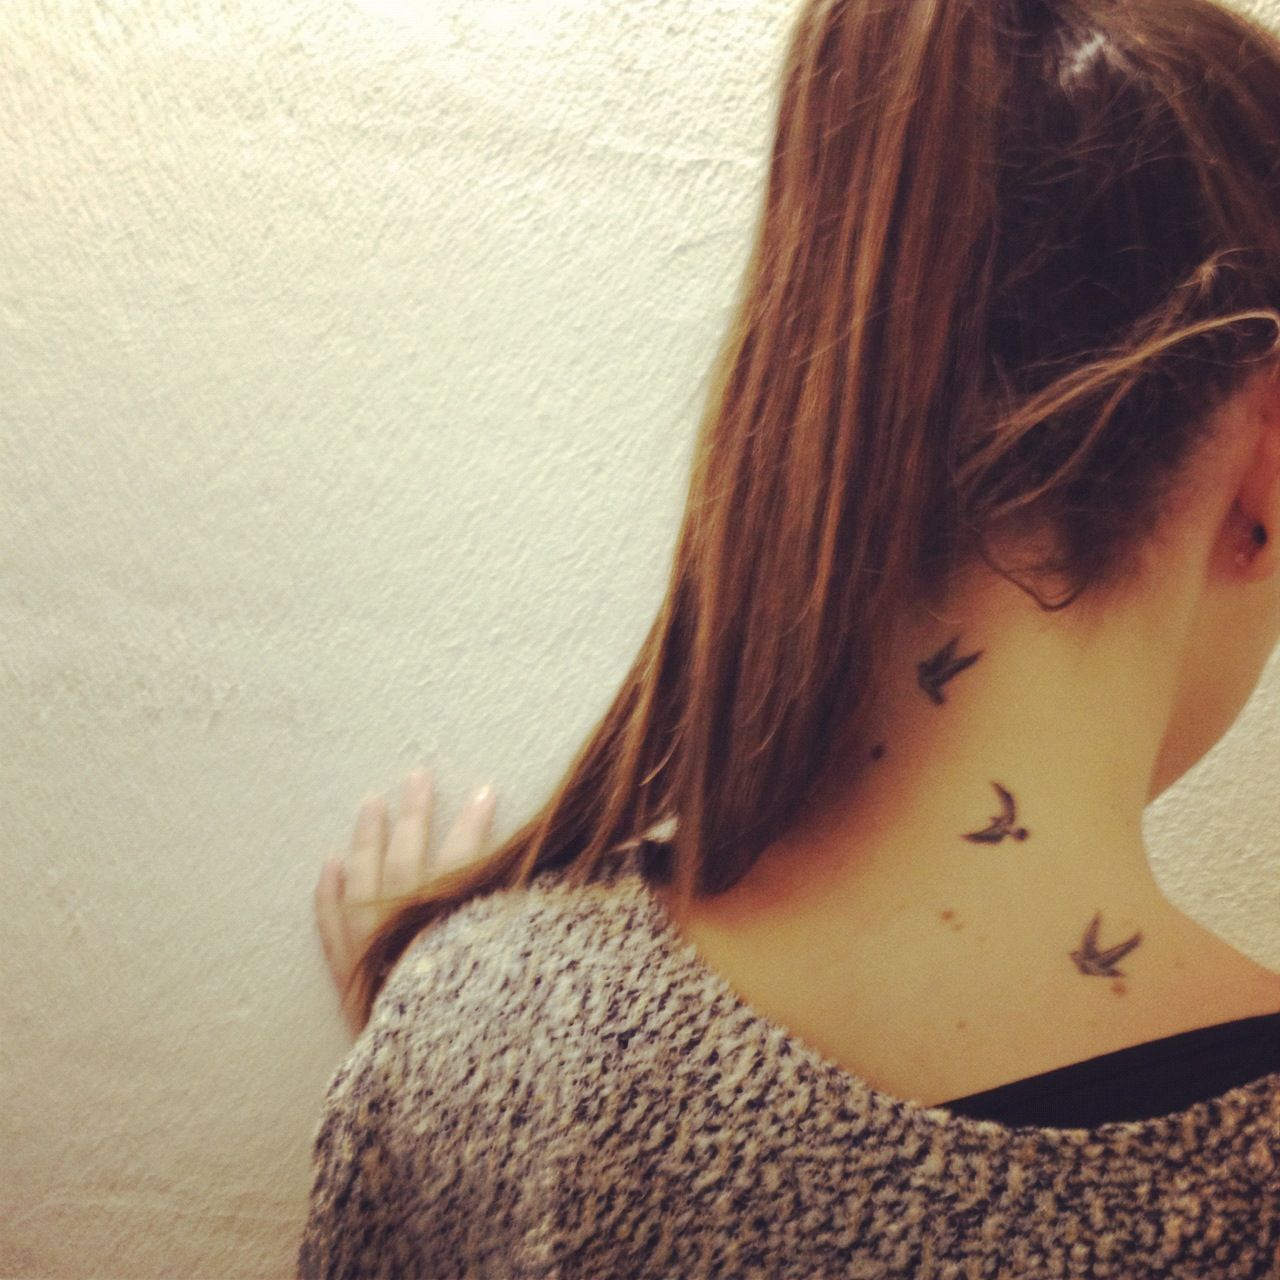 Arrow Tatoo Back Of Neck Lets Get Inked Girls Birds Neck Tattoos throughout sizing 1280 X 1280